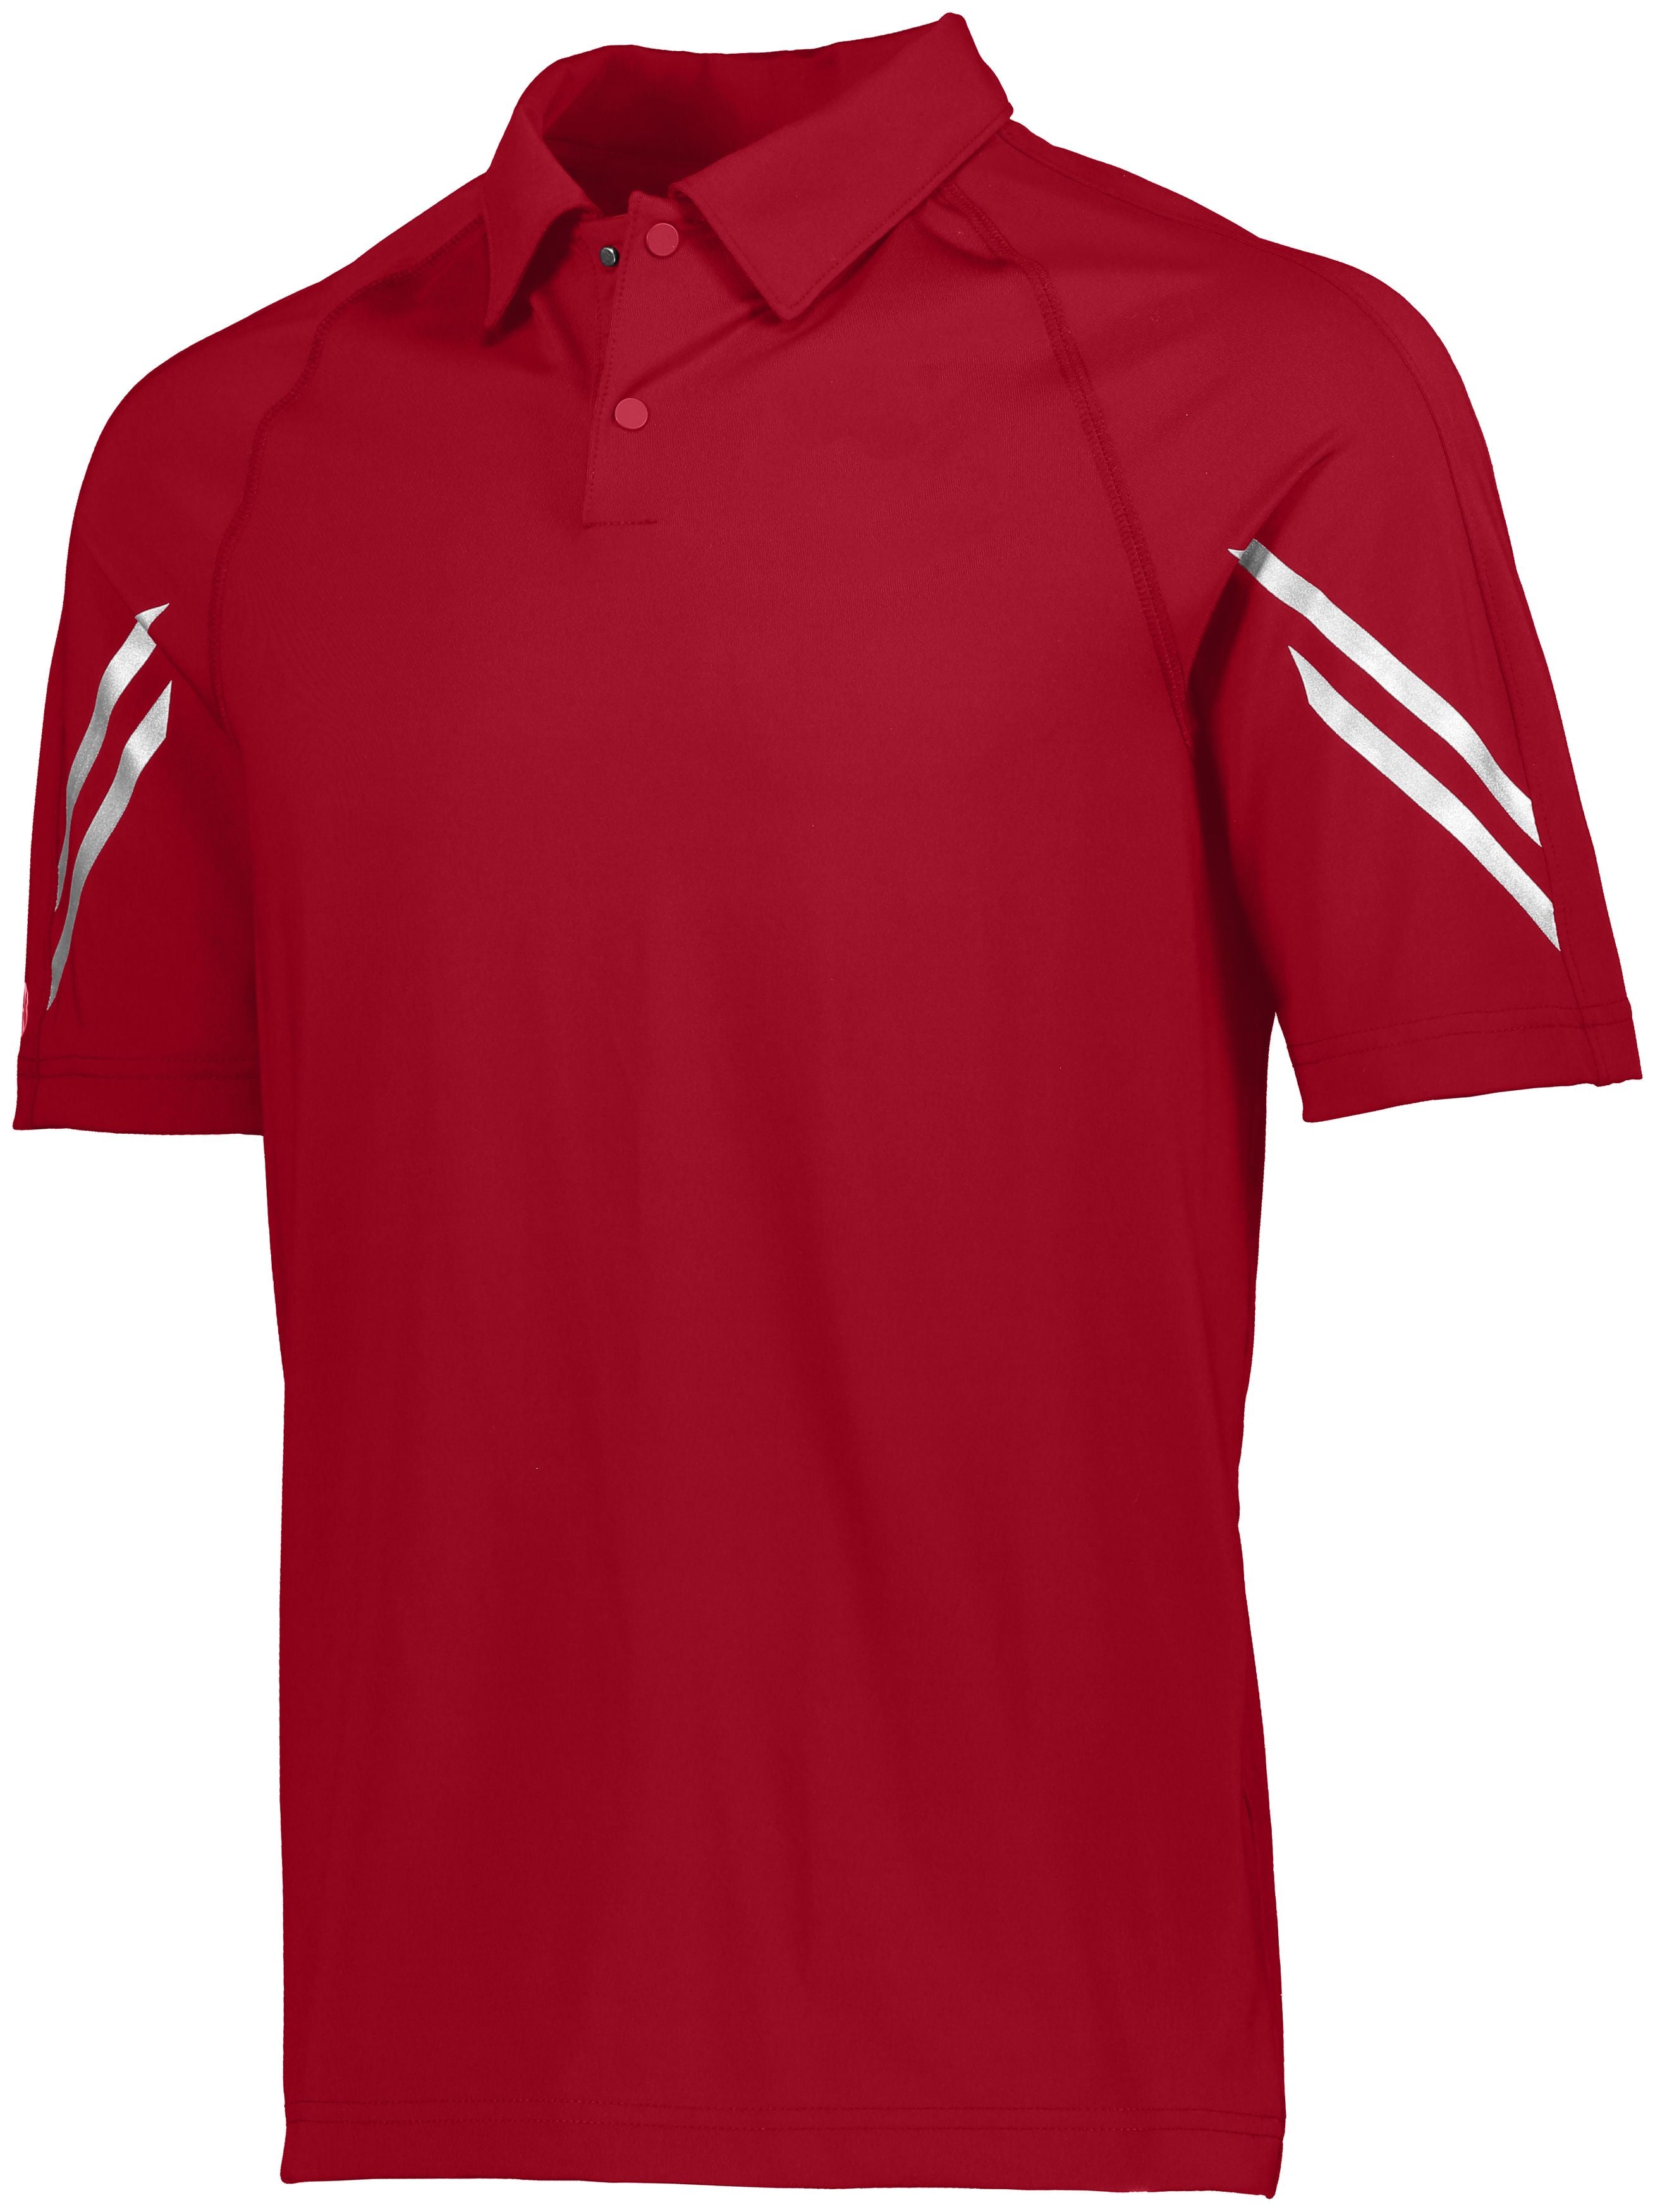 Holloway Flux Polo in Scarlet  -Part of the Adult, Adult-Polos, Polos, Holloway, Shirts, Flux-Collection, Corporate-Collection product lines at KanaleyCreations.com